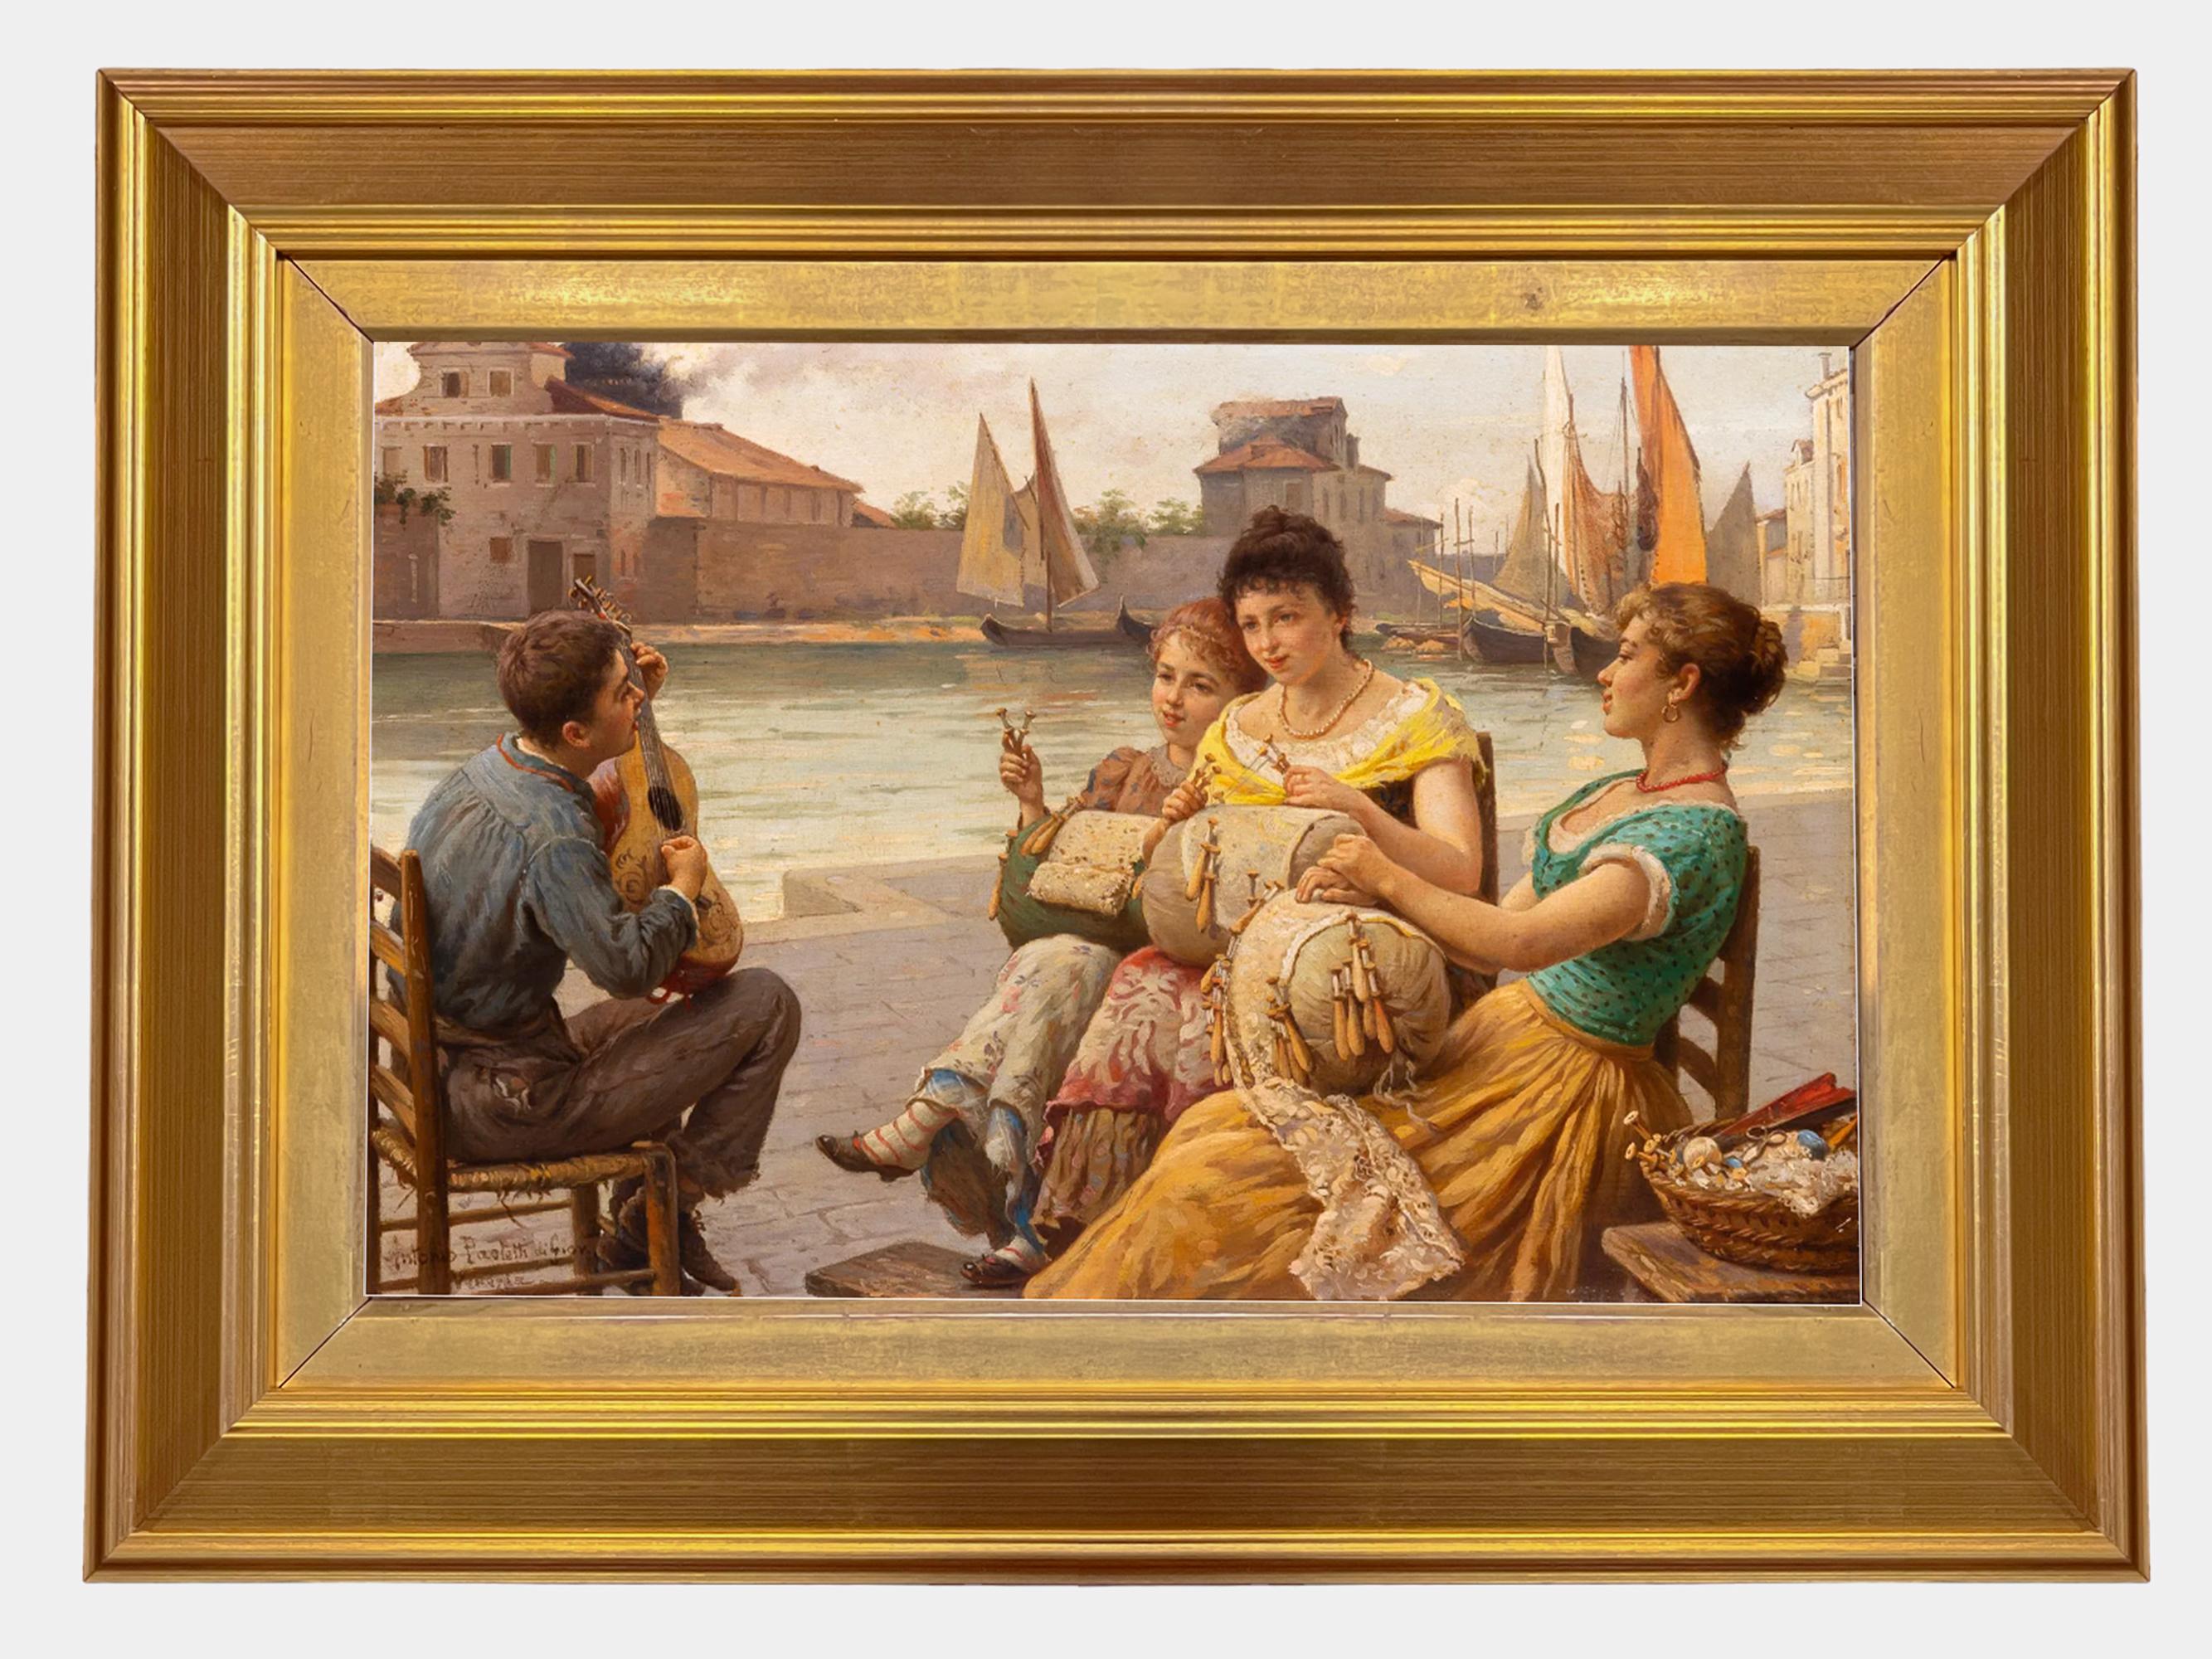 Antonio Ermolao Paoletti Italian, 1834-1912

A Serenade for the Venitian Lacemakers

Signed and inscribed Antonio Paoletti di Giov / Venezia (ll) in bottom left corner

Oil on cradled panel

This fabulous oil painting by Paoletti focuses on a a